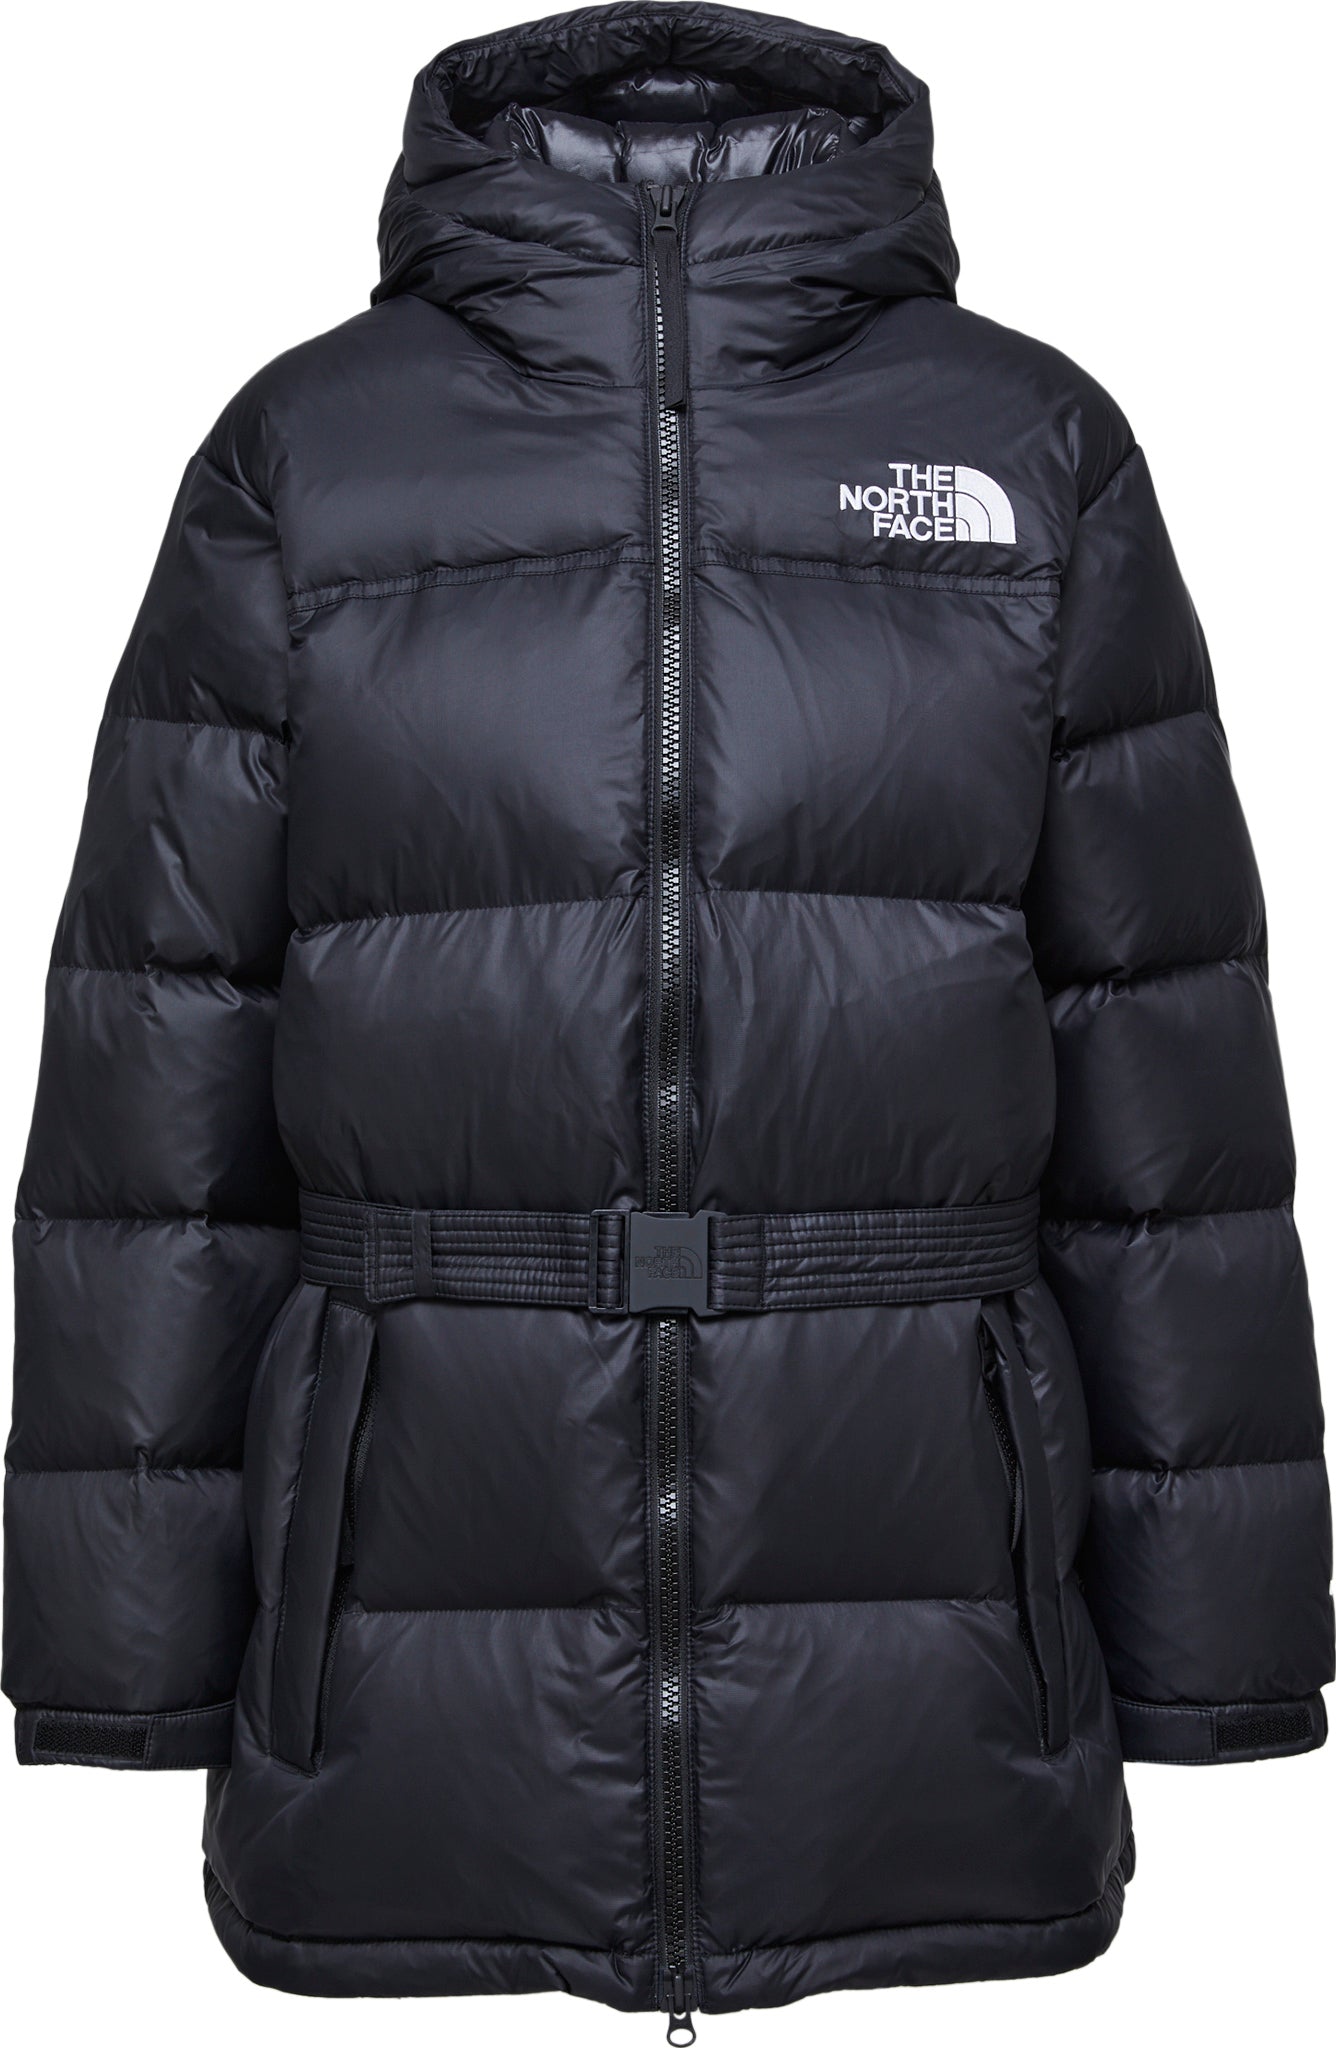 The North Face Nuptse Belted Mid Jacket - Women's